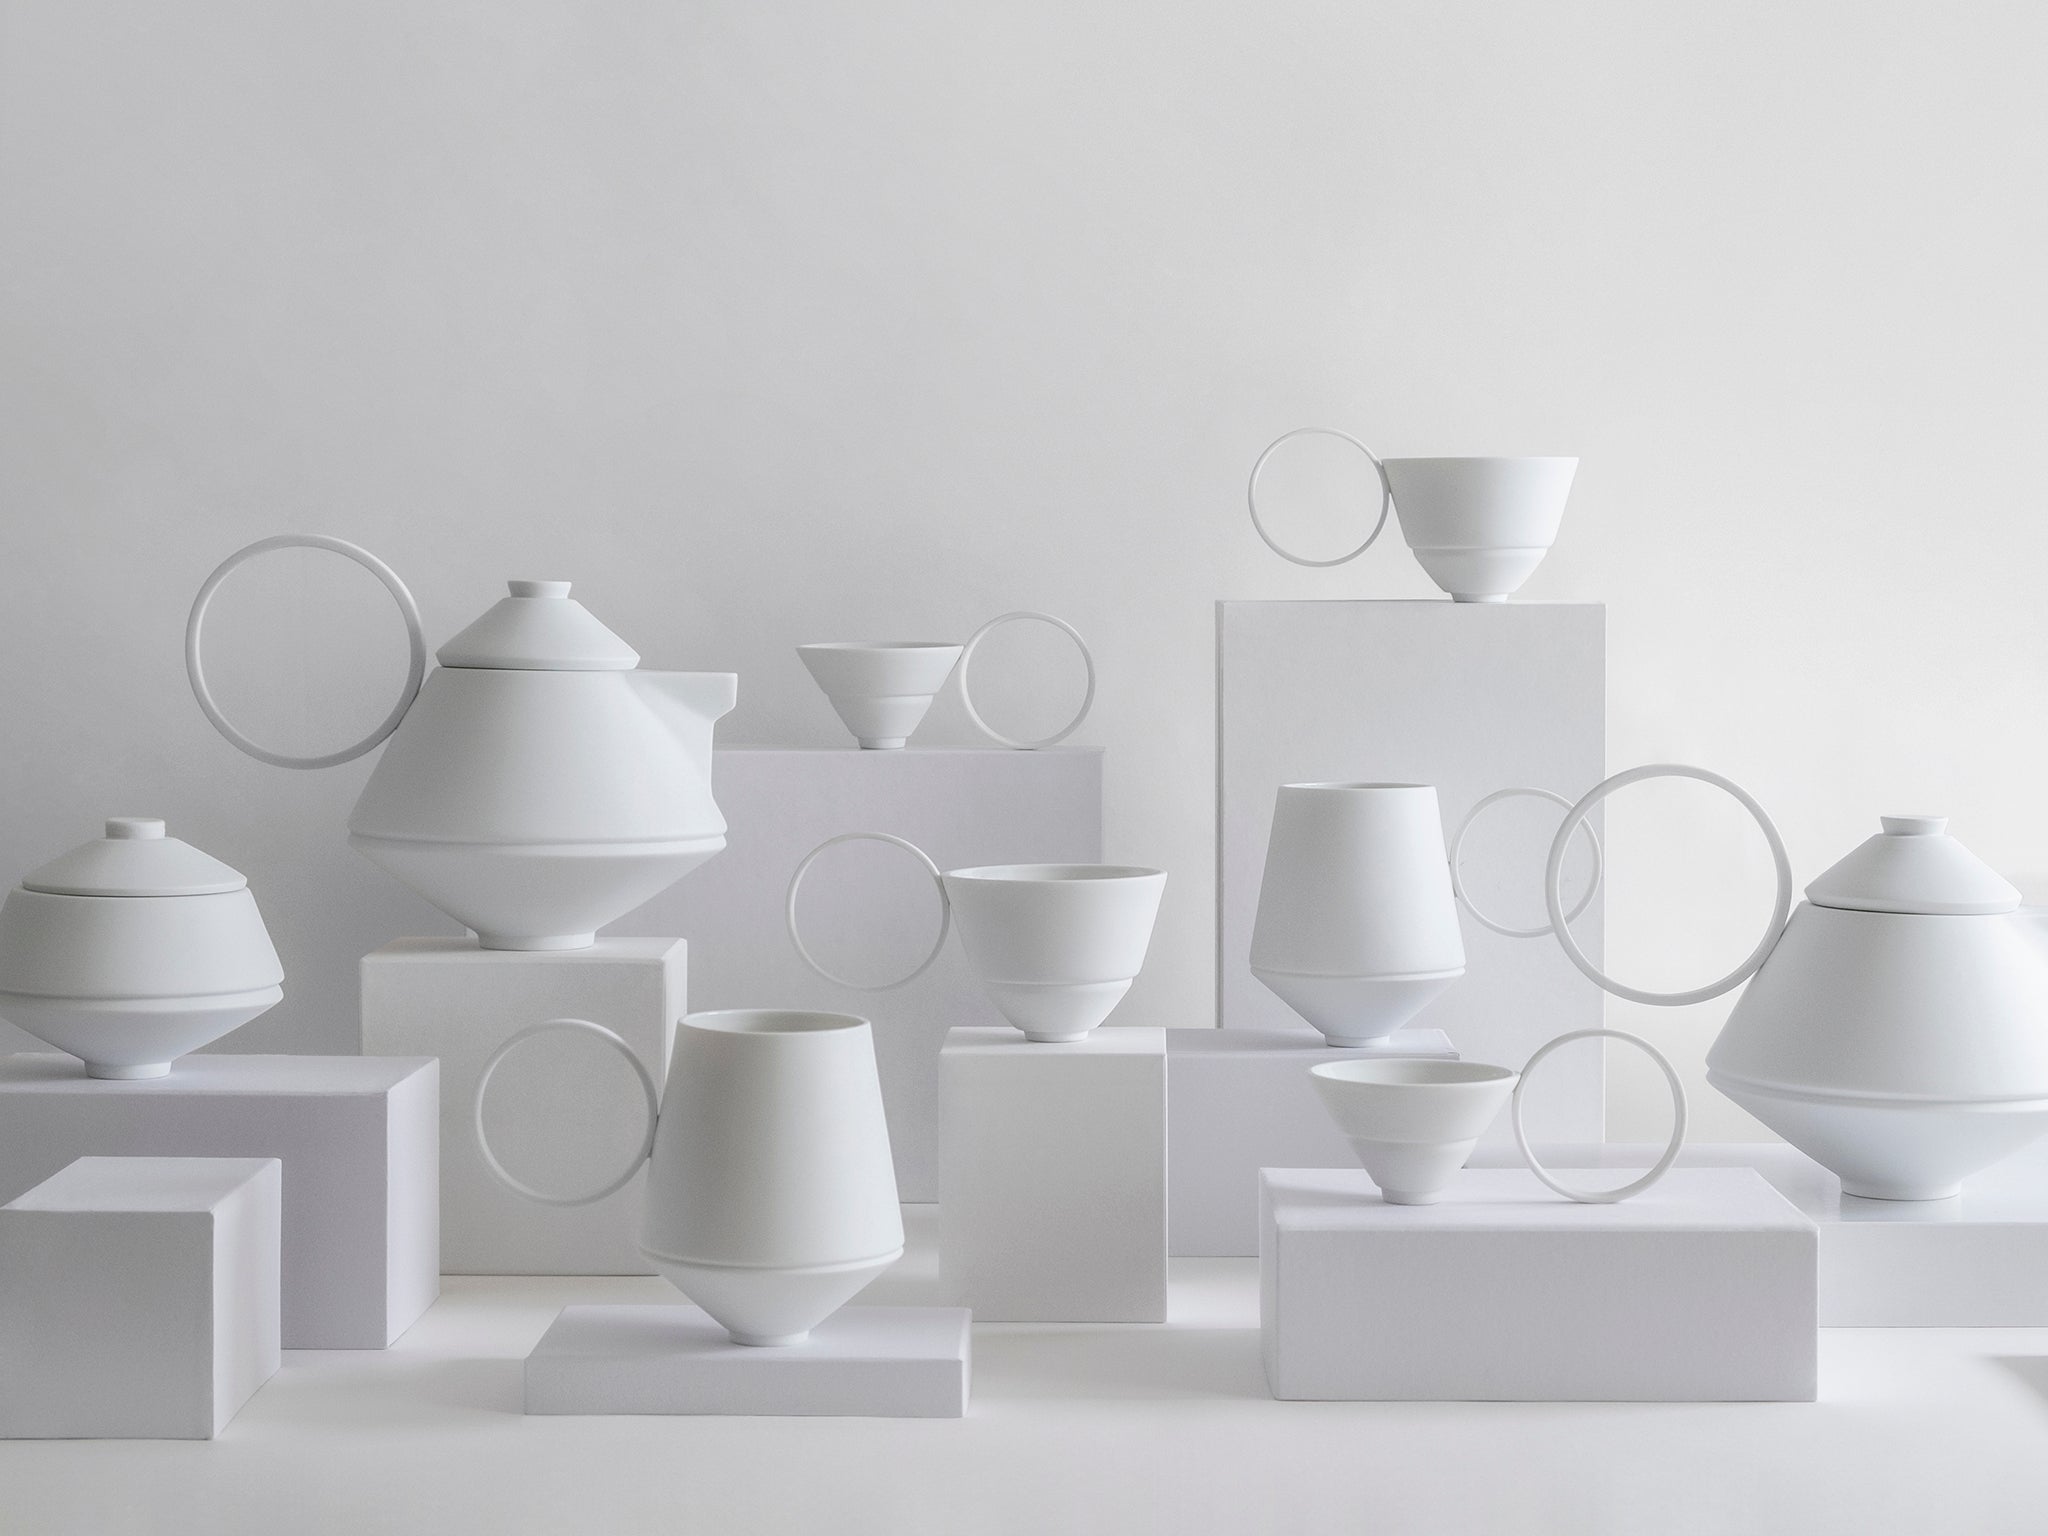 Serve tea in style with this ceramics collection